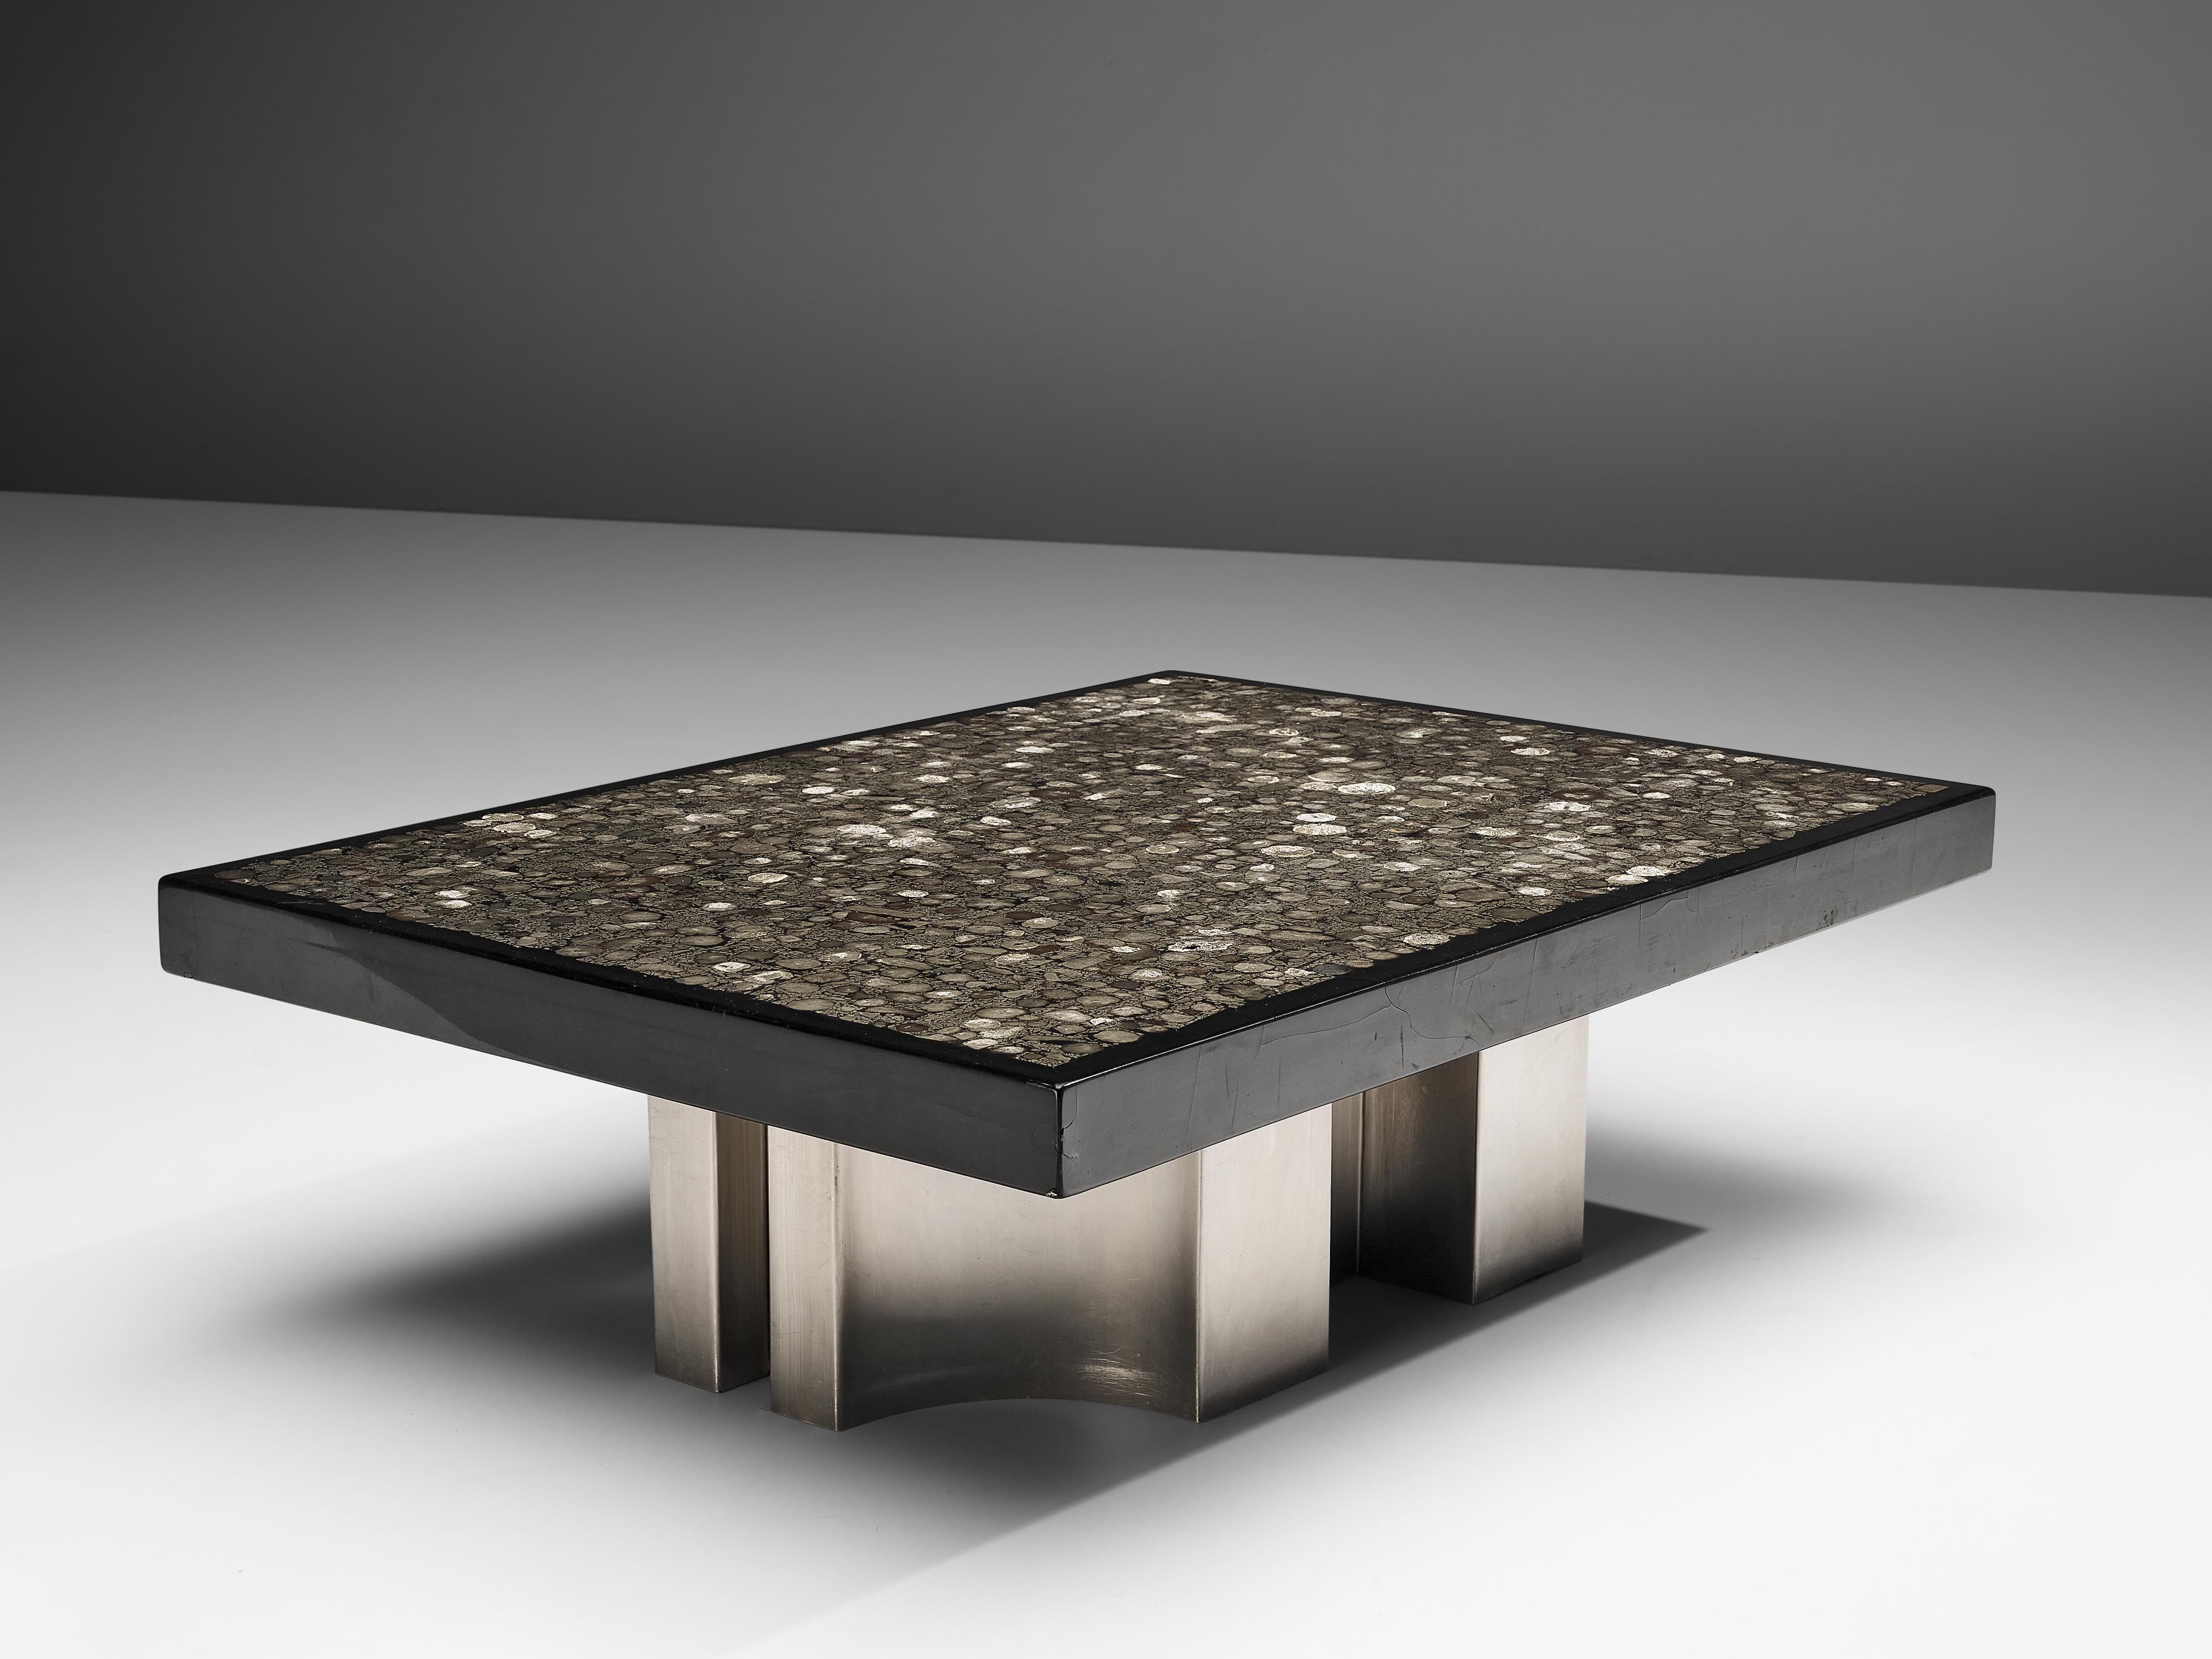 Steel Jean Claude Dresse Coffee Table with Inlay of Marcasite